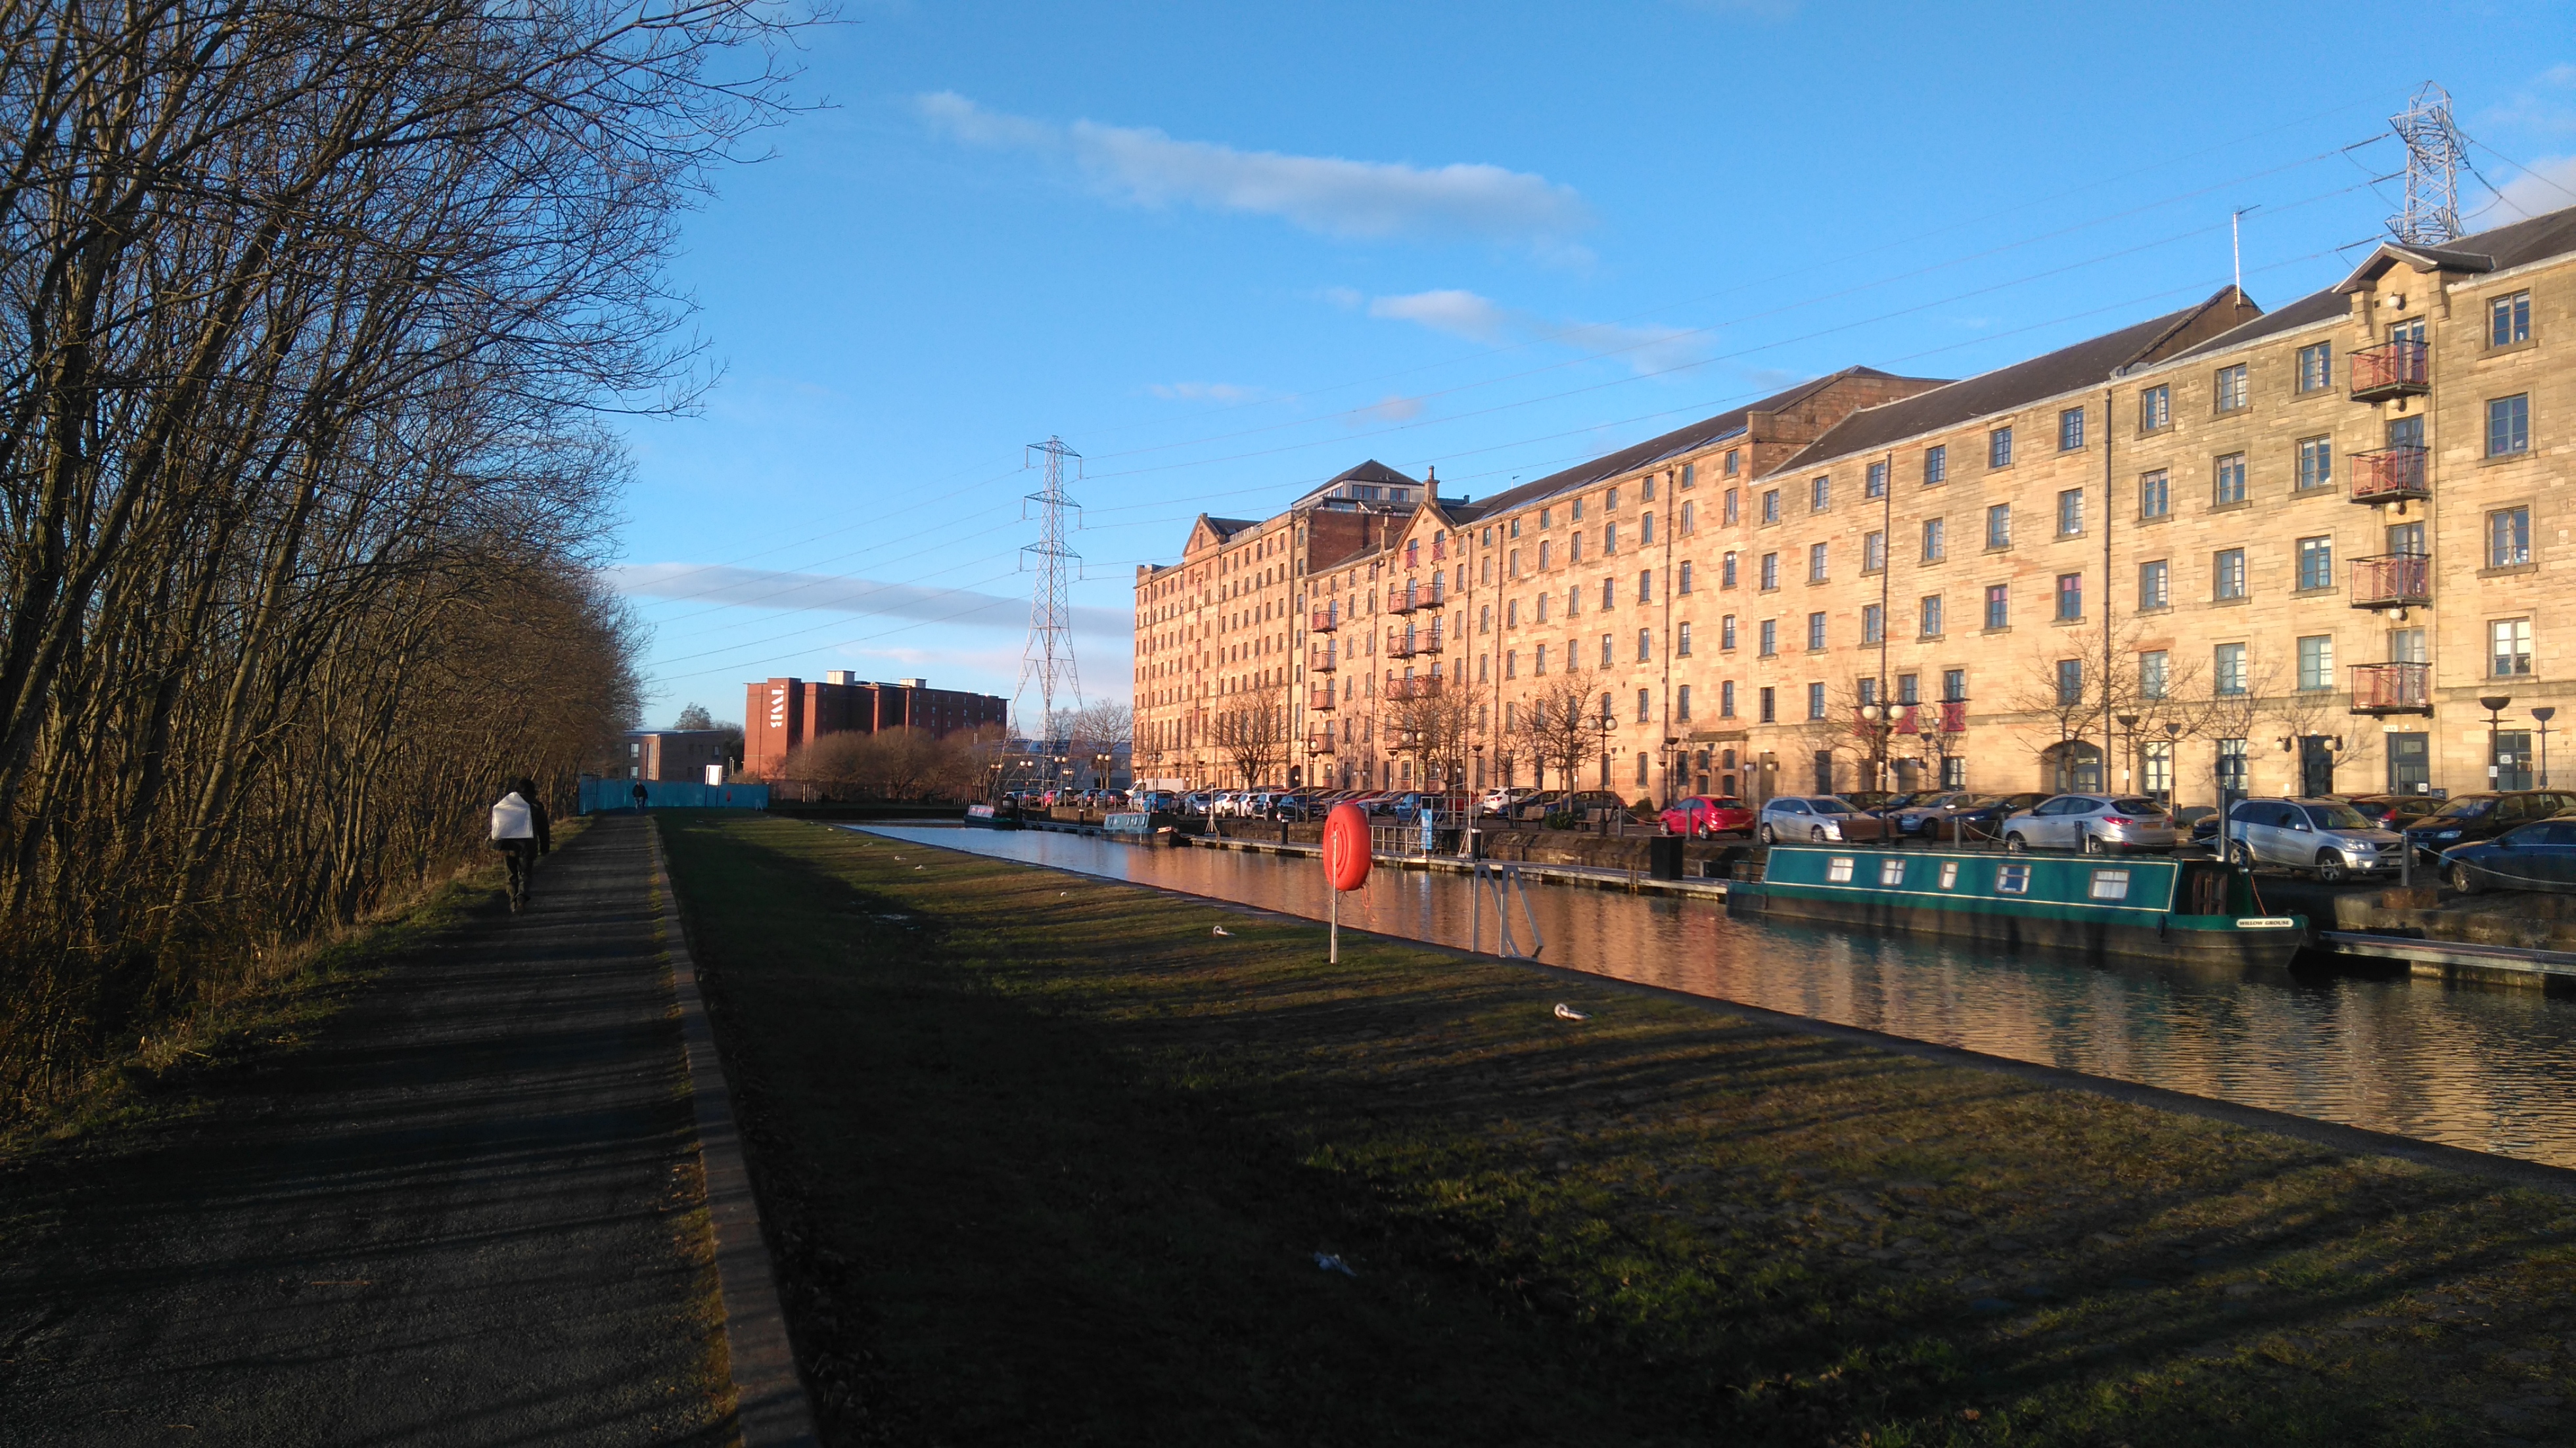 View of The Whisky Bond from Speirs Wharf on the canal side.